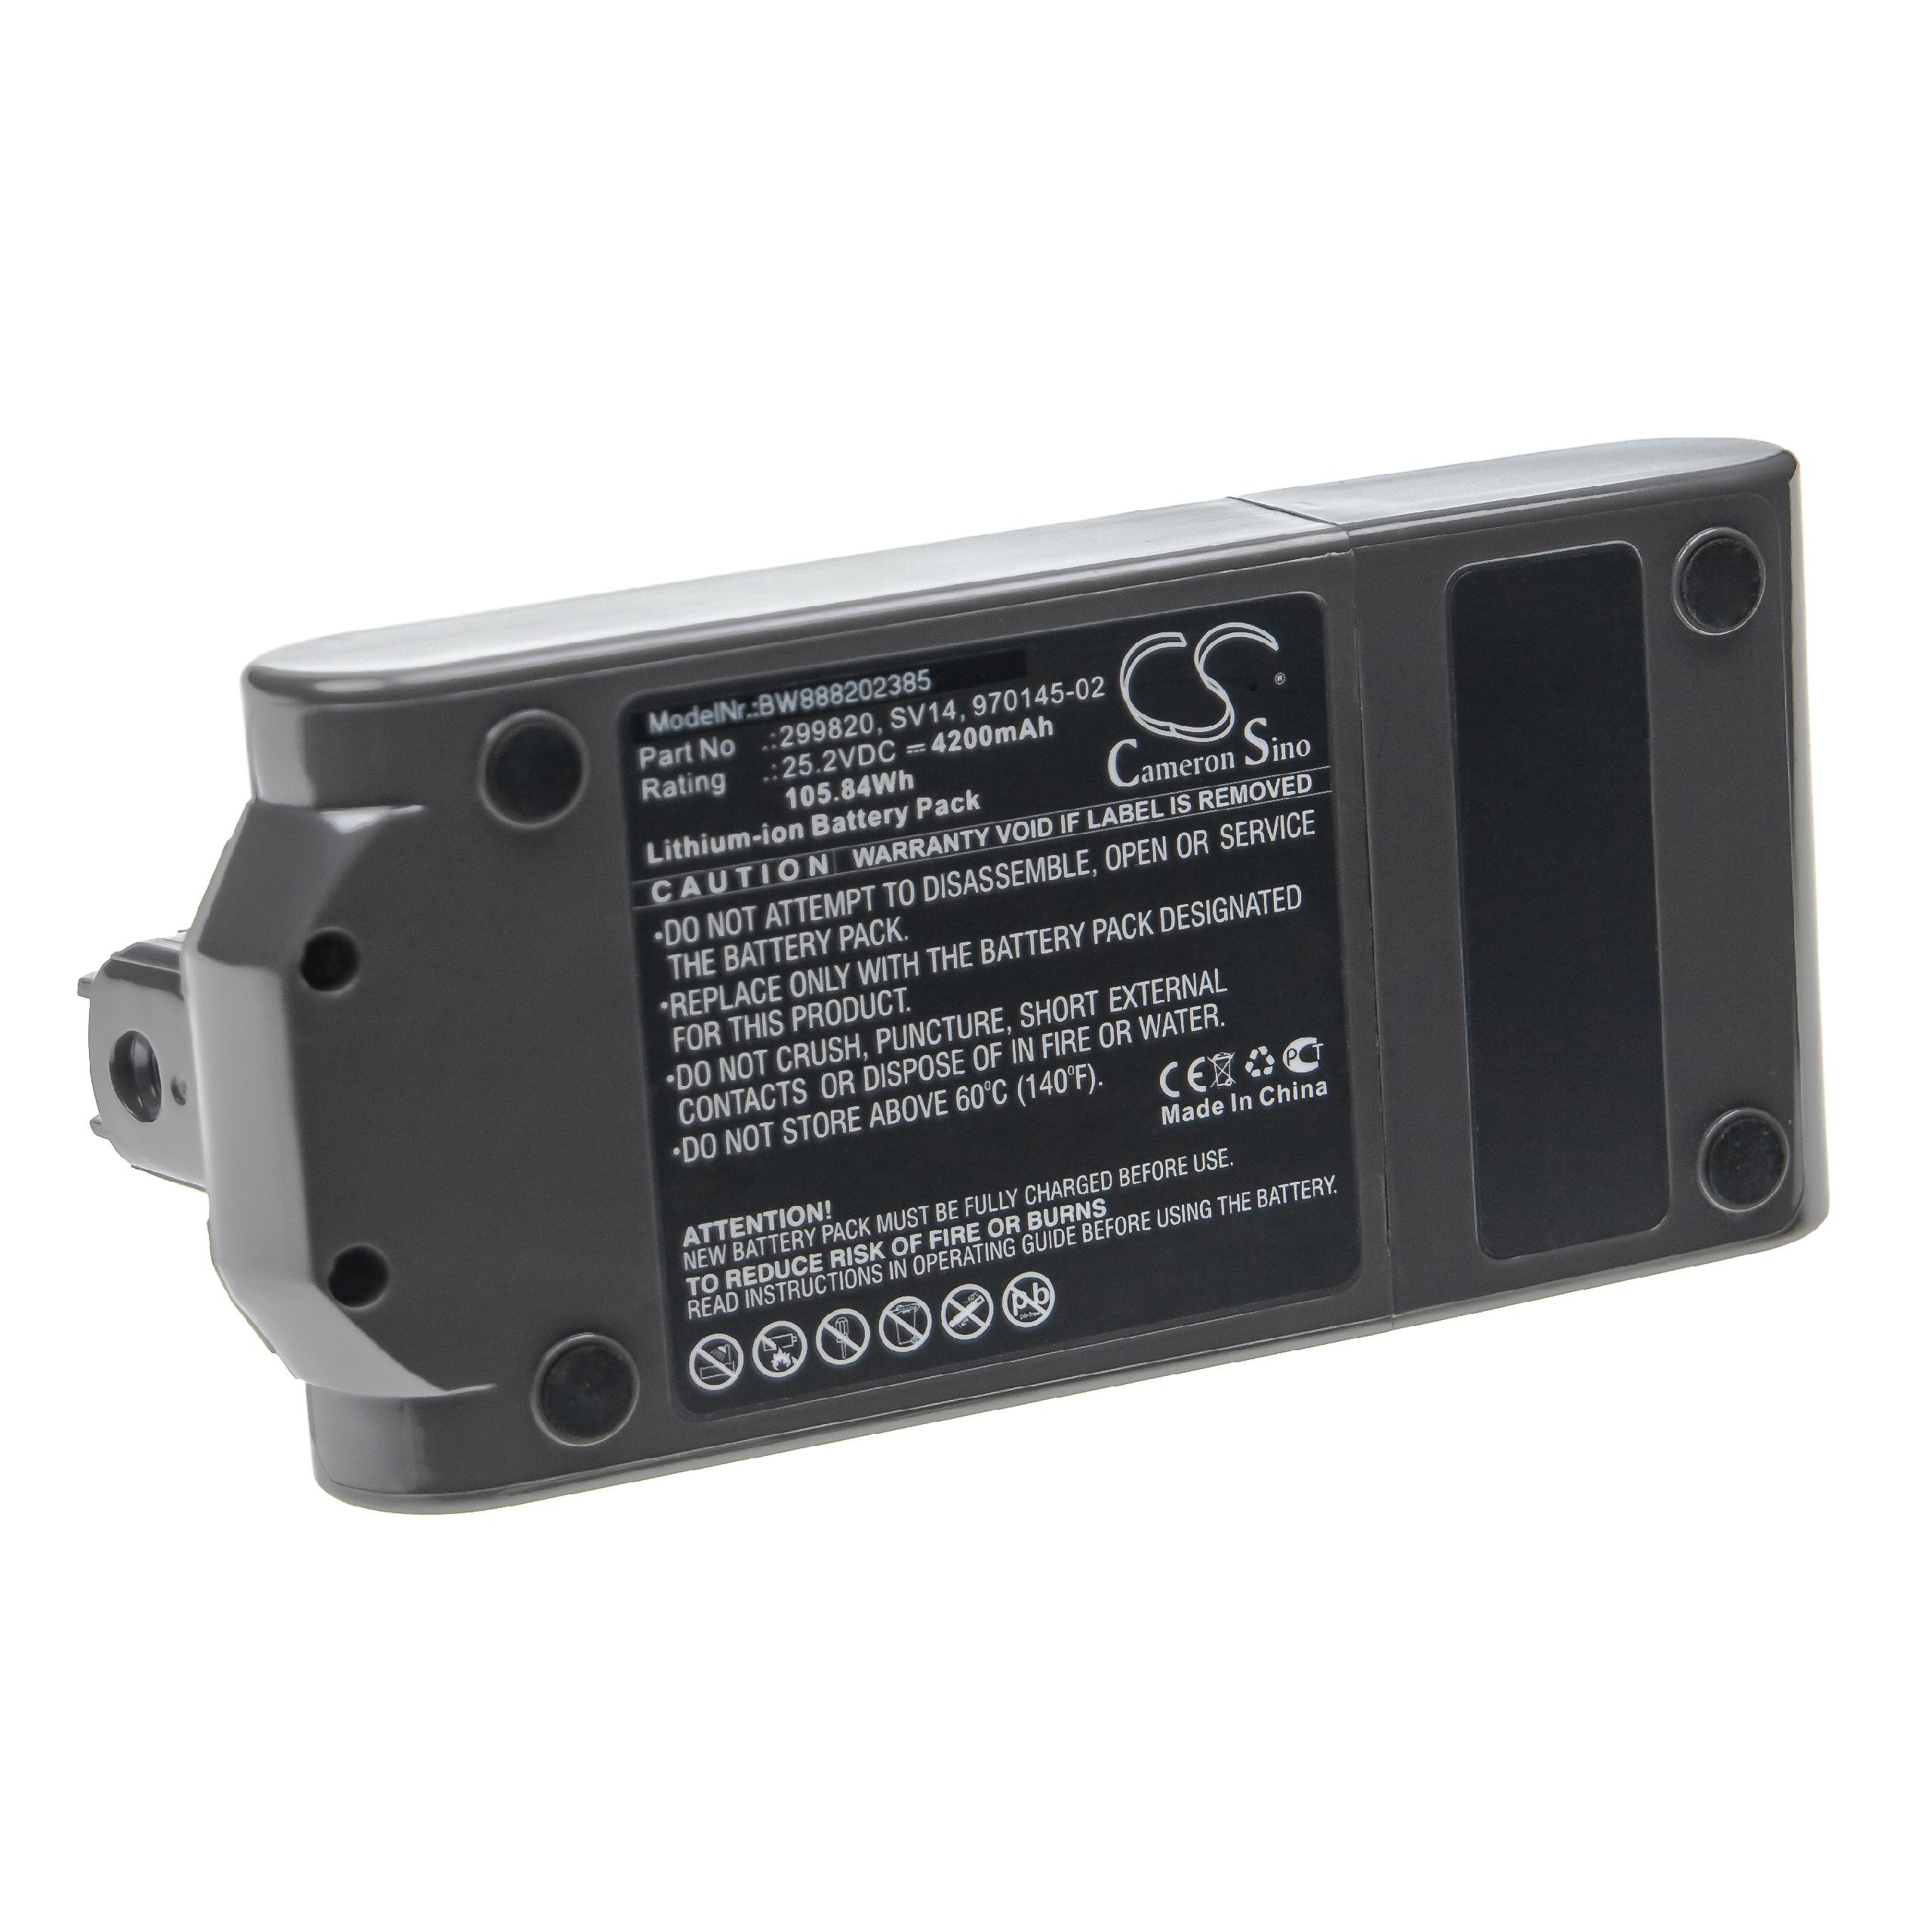 Battery Replacement for Dyson 970145-02, 299820 for - 4200mAh, 25.2V, Li-Ion